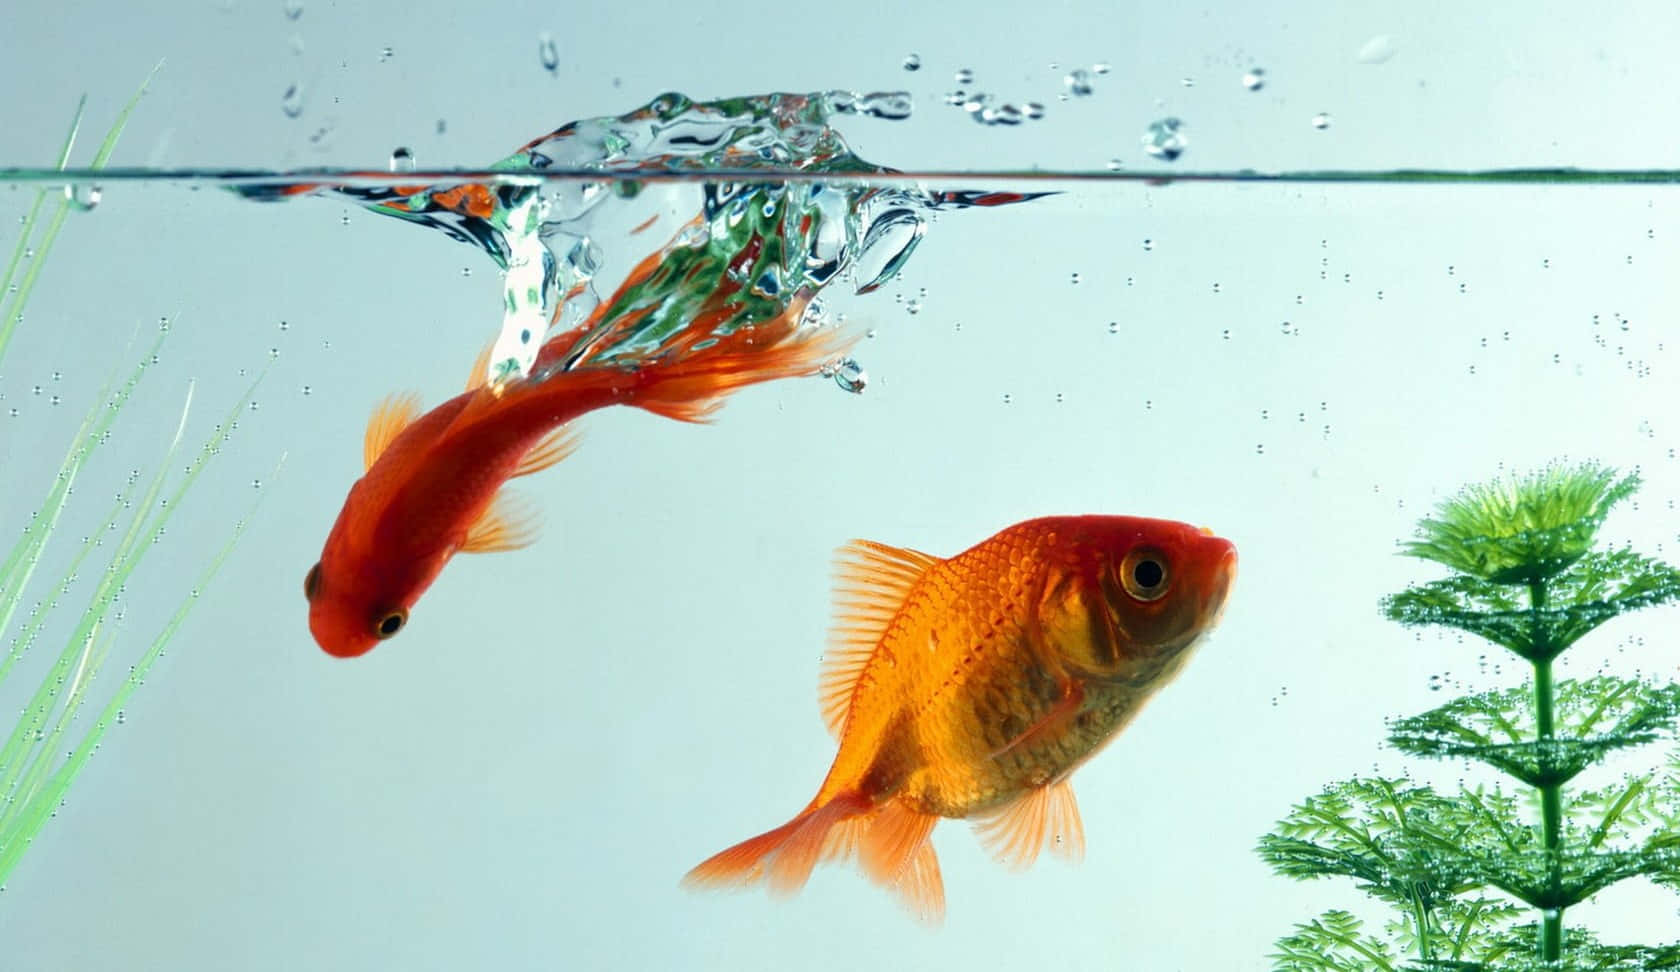 "Take In The Beauty Of Nature With This Exquisite Goldfish Background"